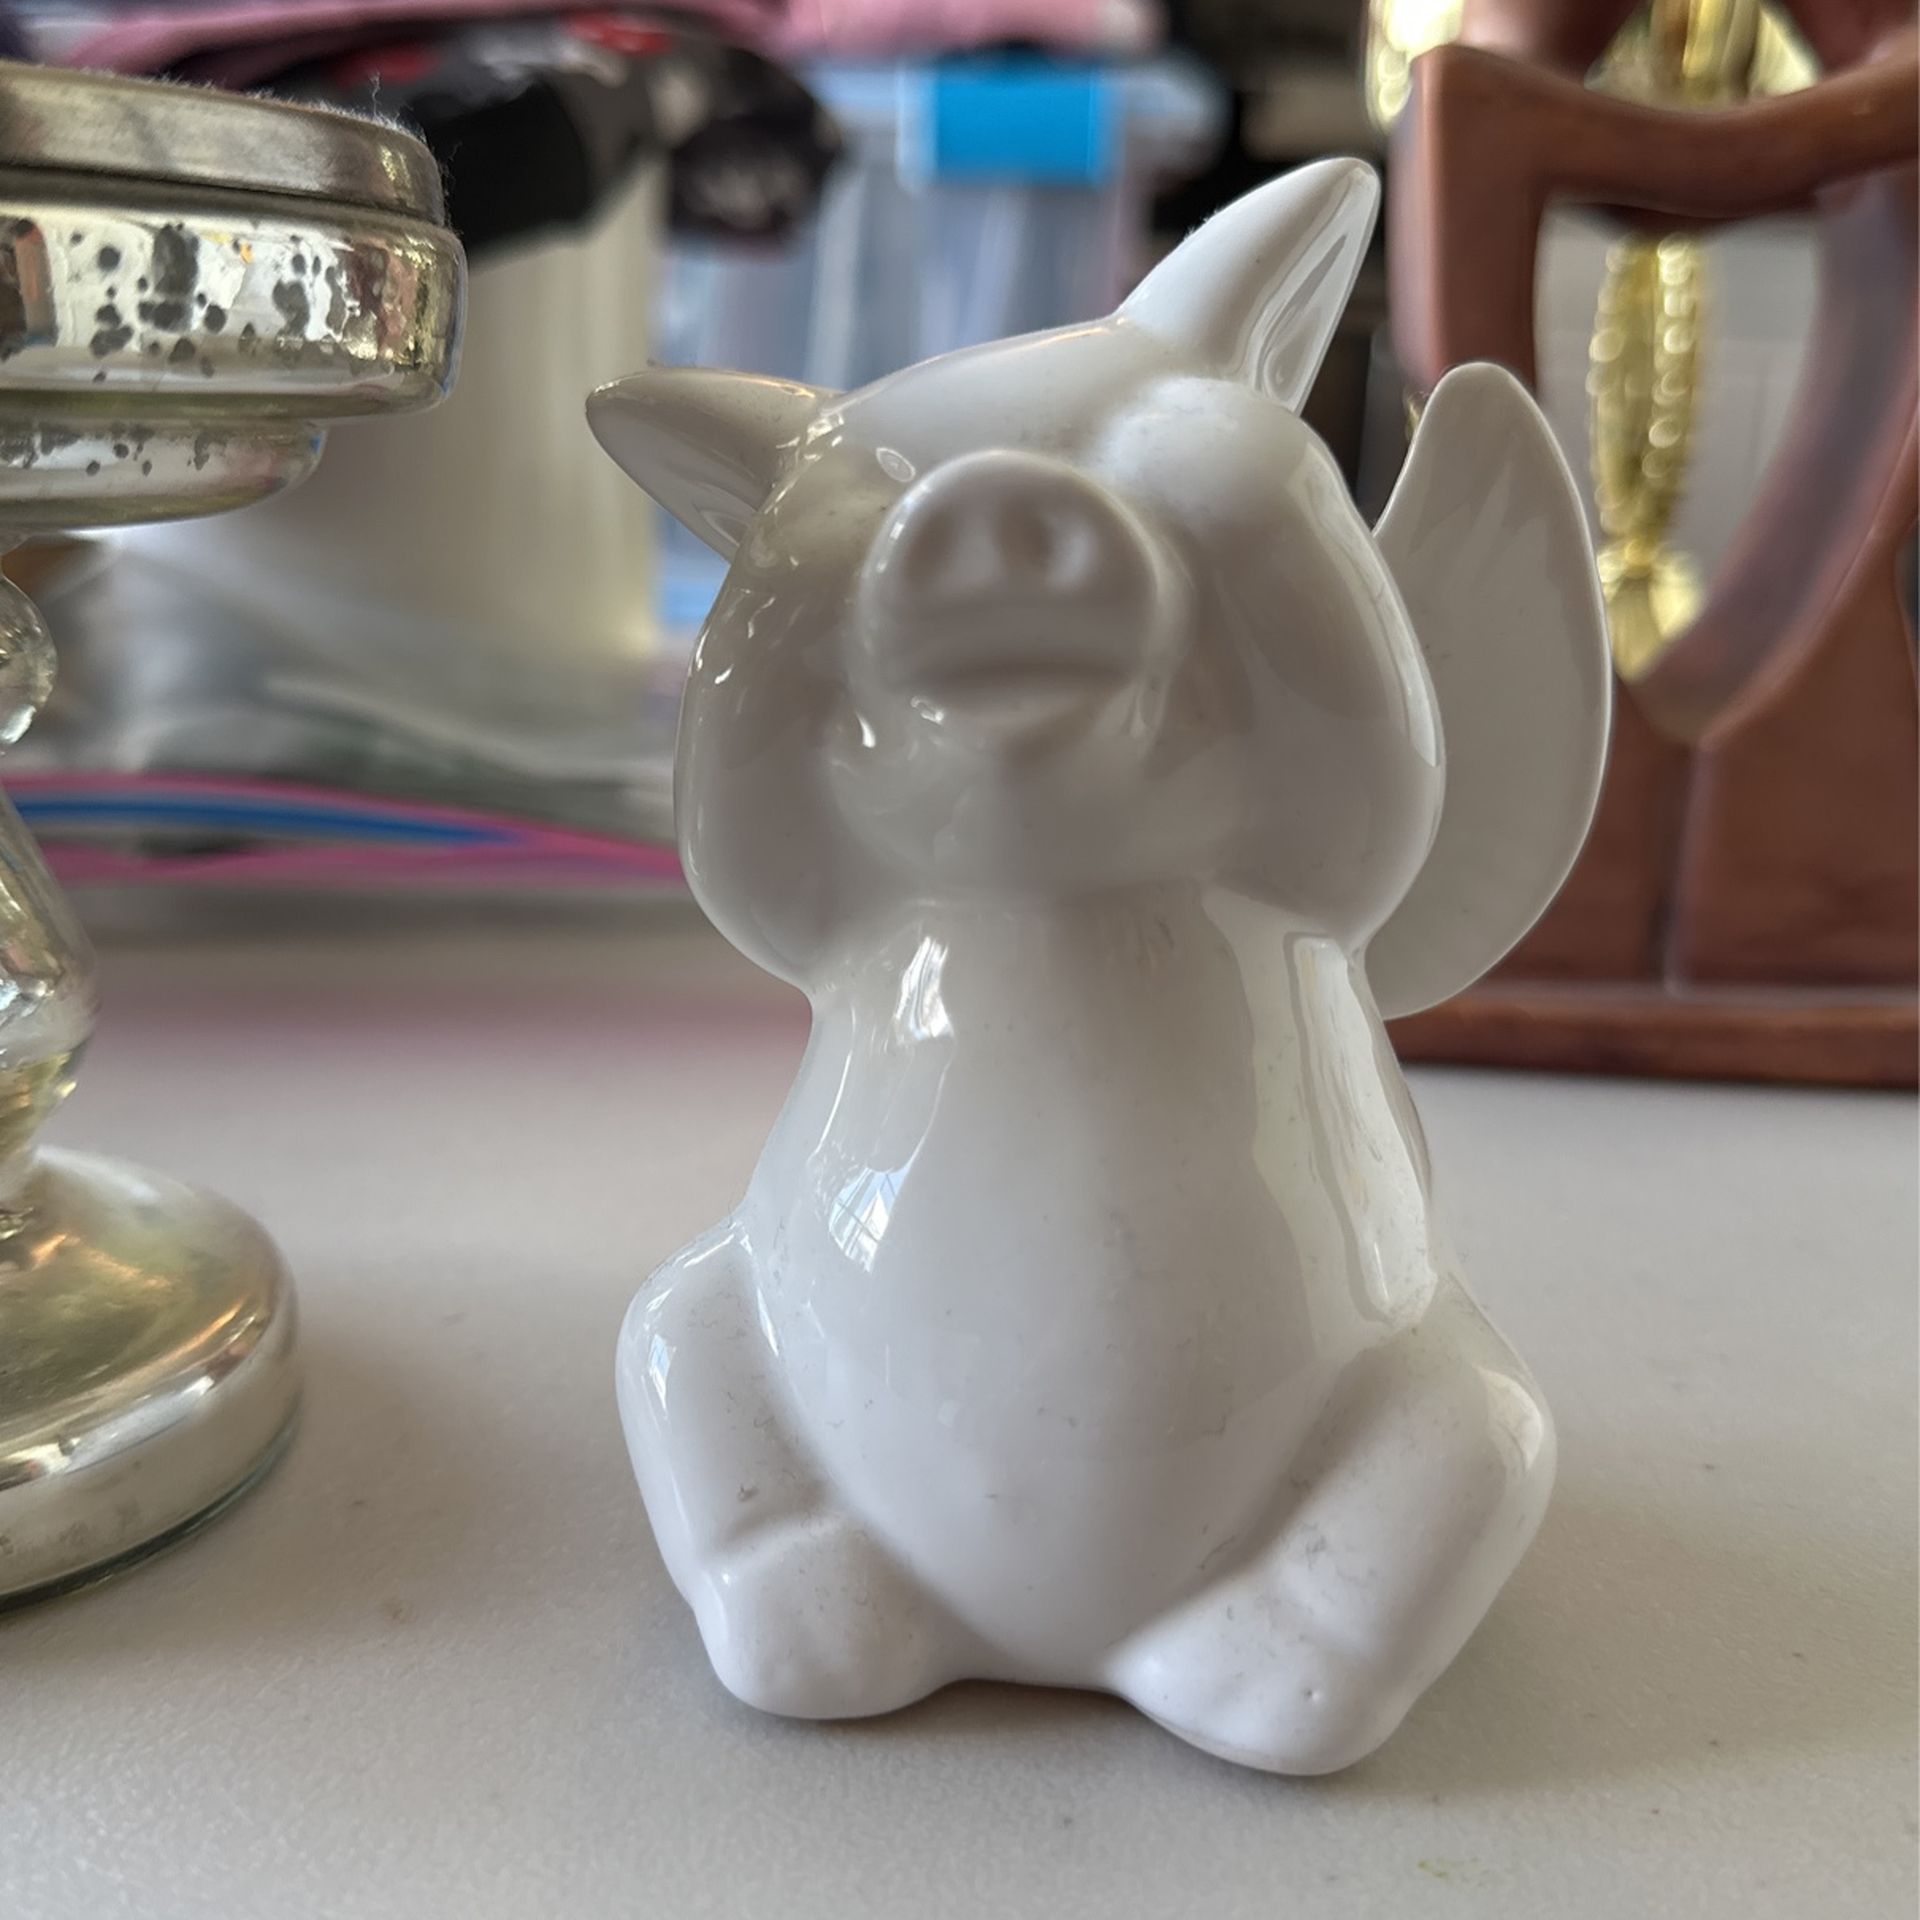 Candle Holder And Wing Pig Sculpture $1.00